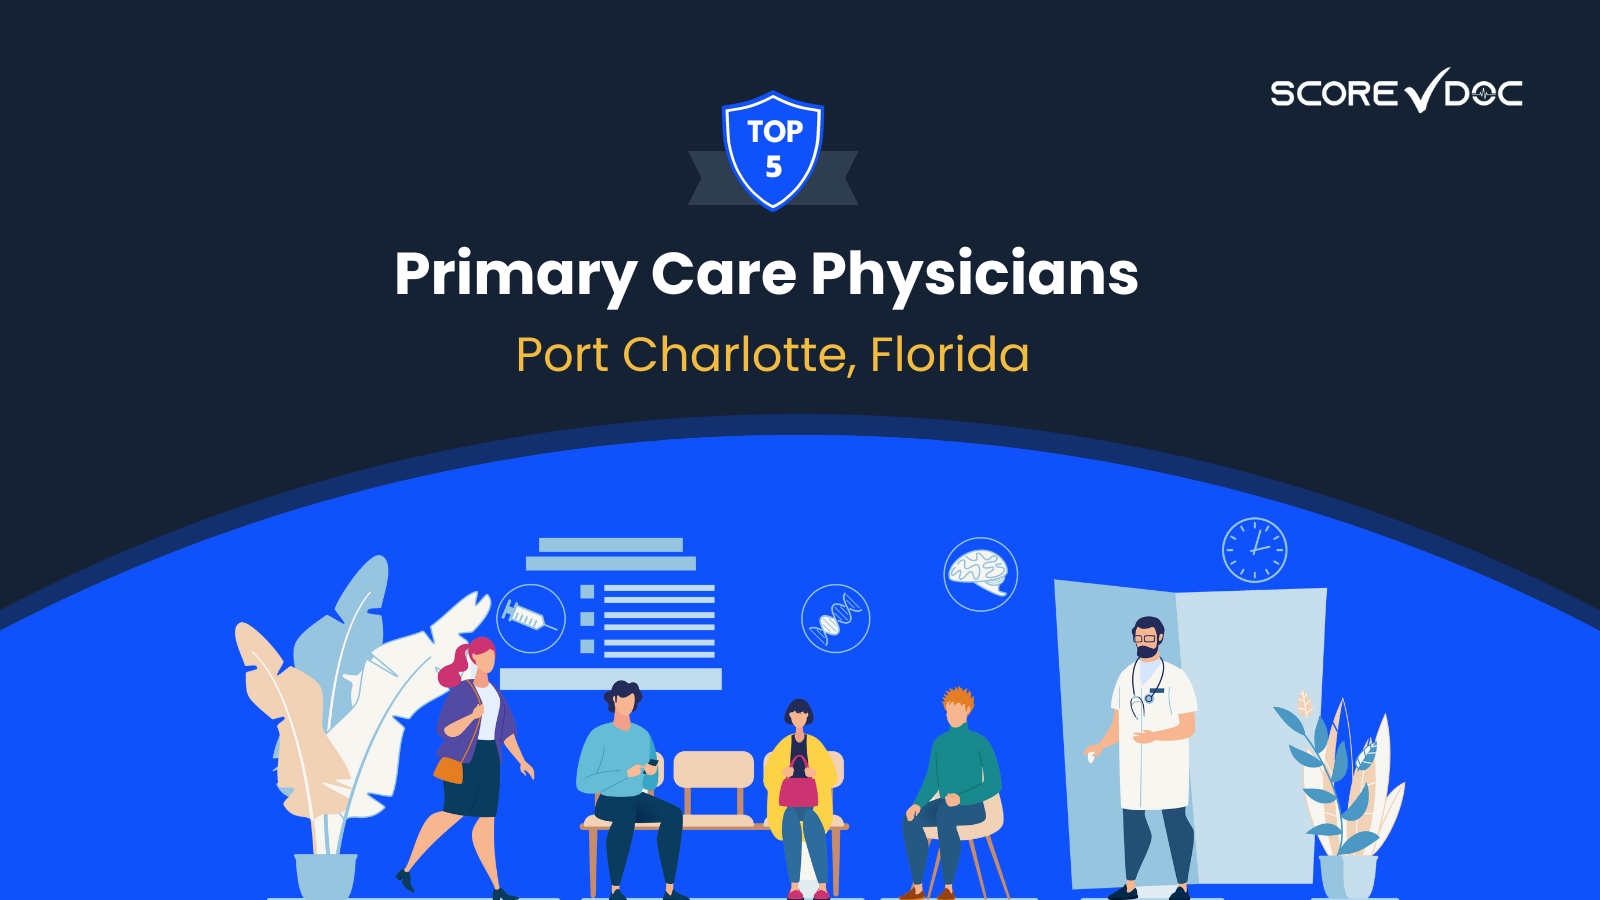 Top Rated Primary Care Physicians in Port Charlotte, Florida